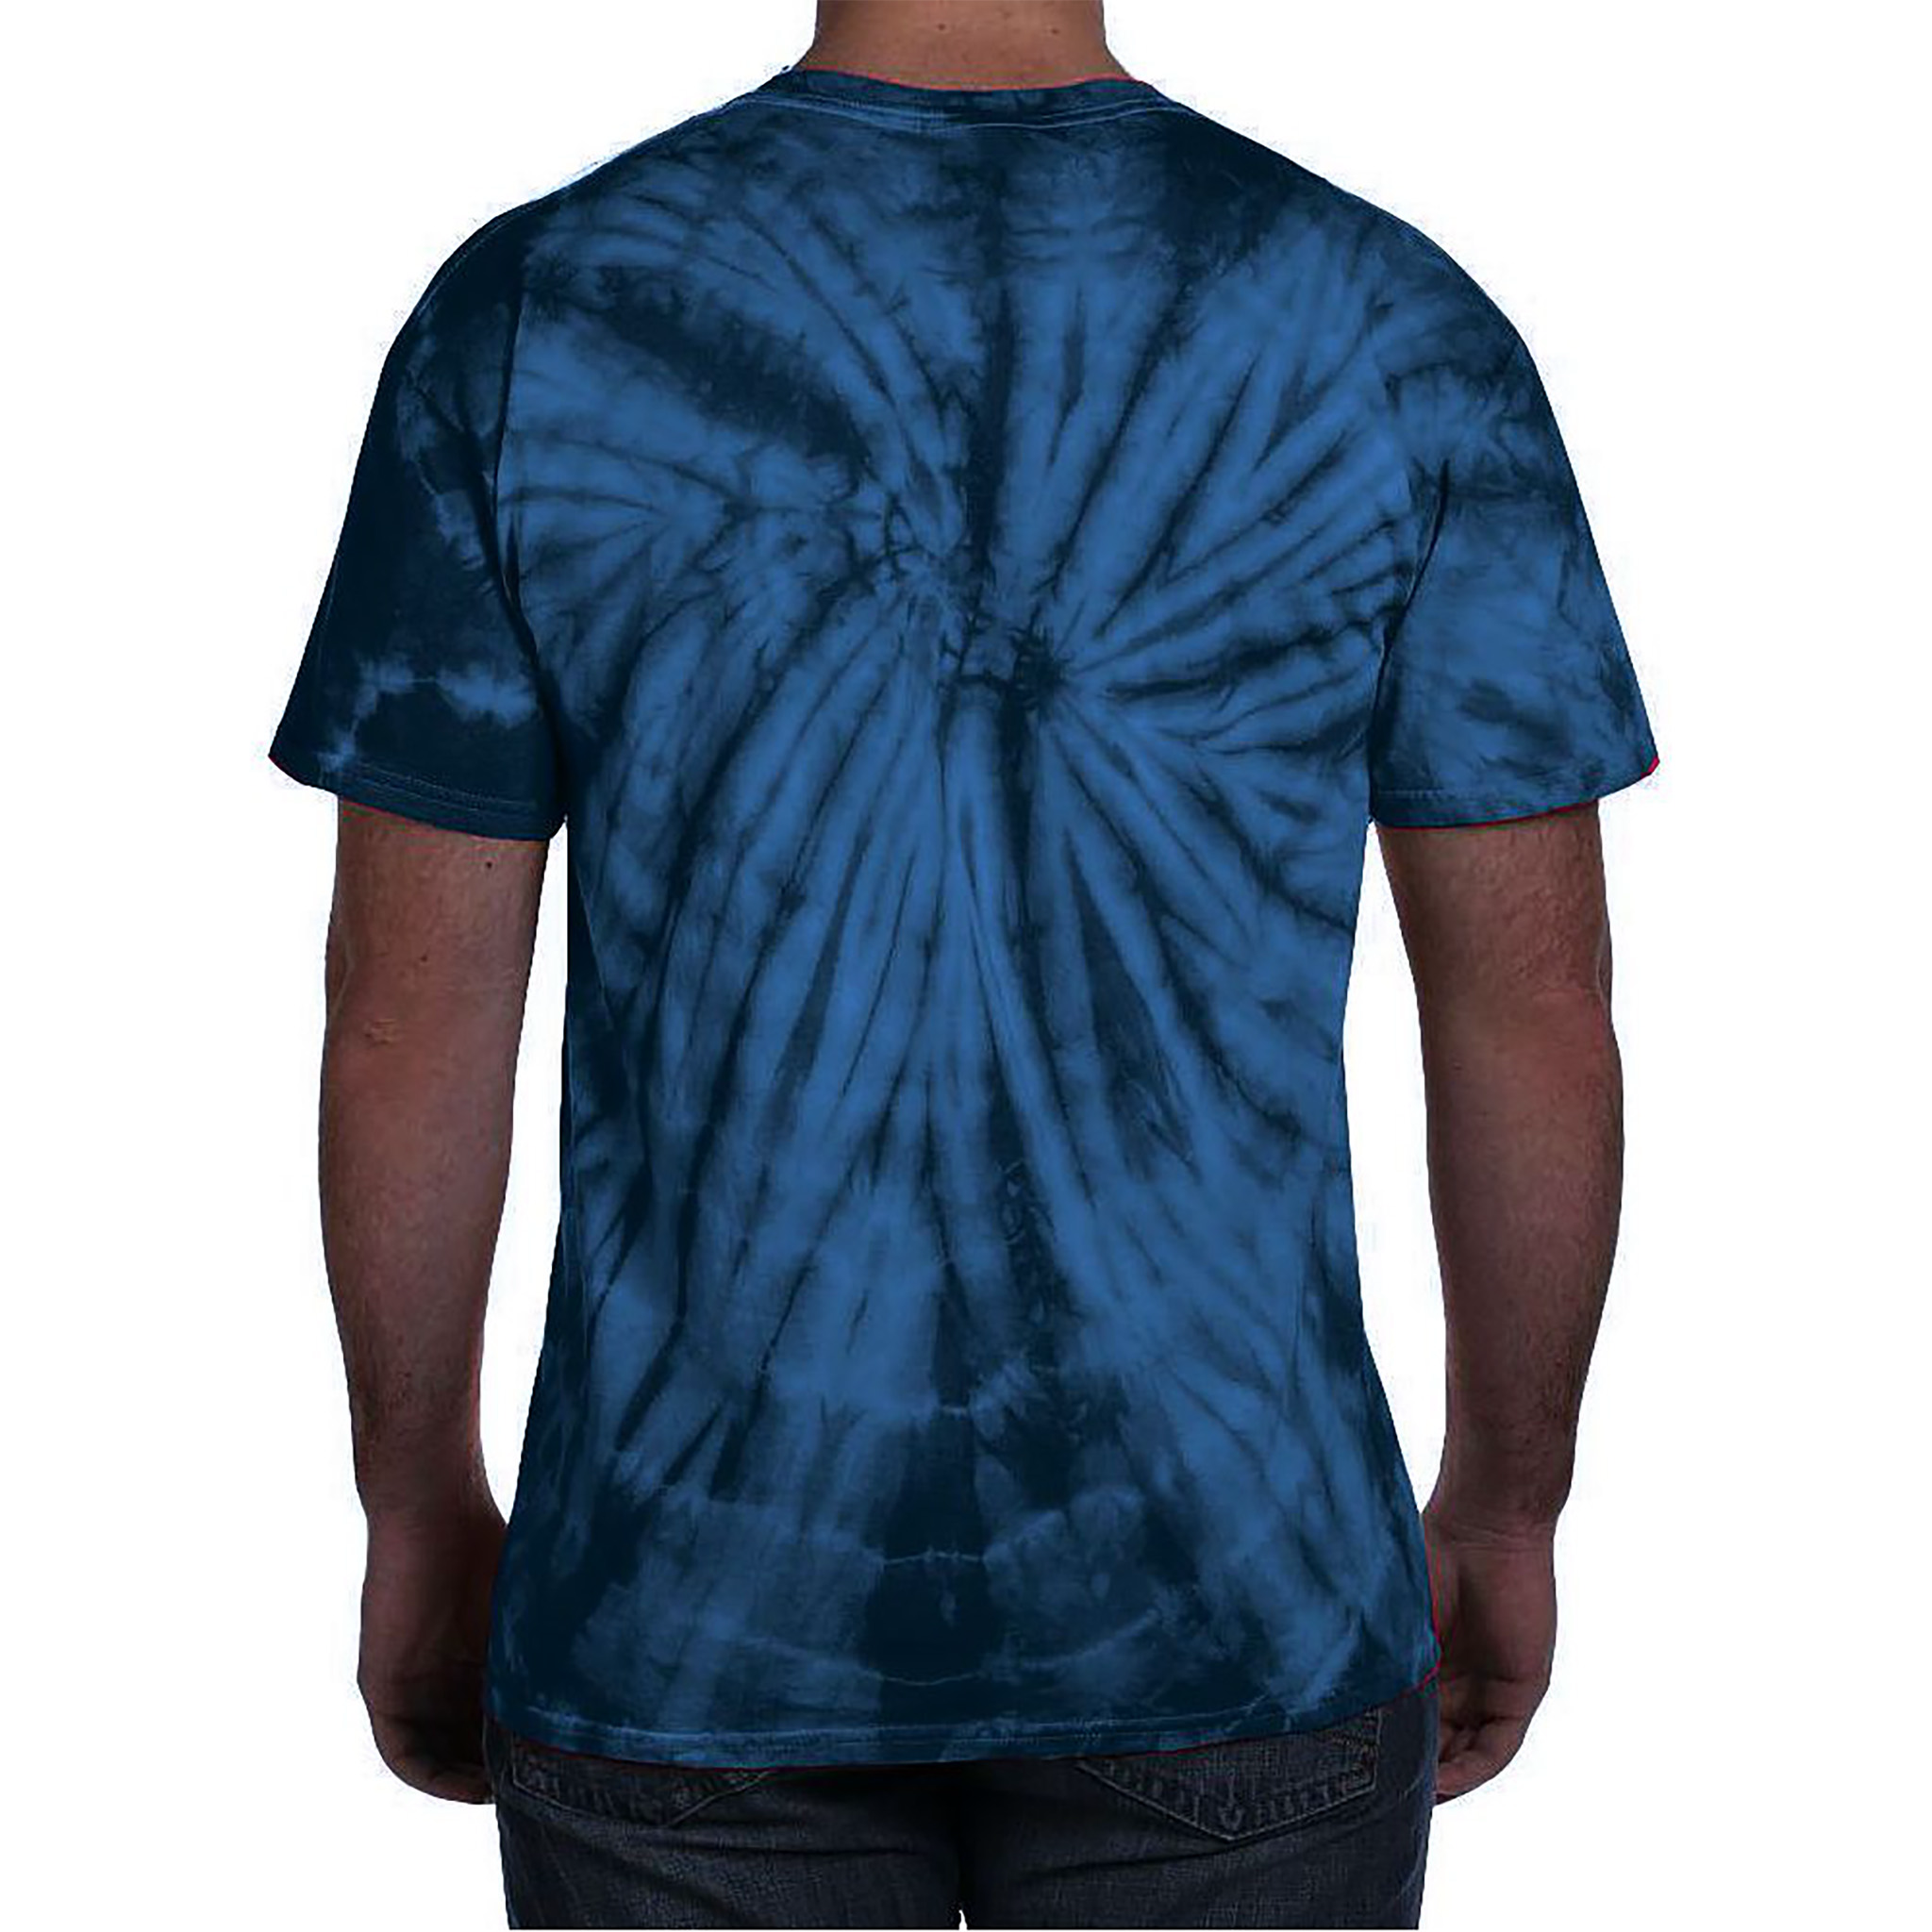 Funny 80th Birthday: It Took Me 80 Years To Look This Good Tie-Dye T-Shirt